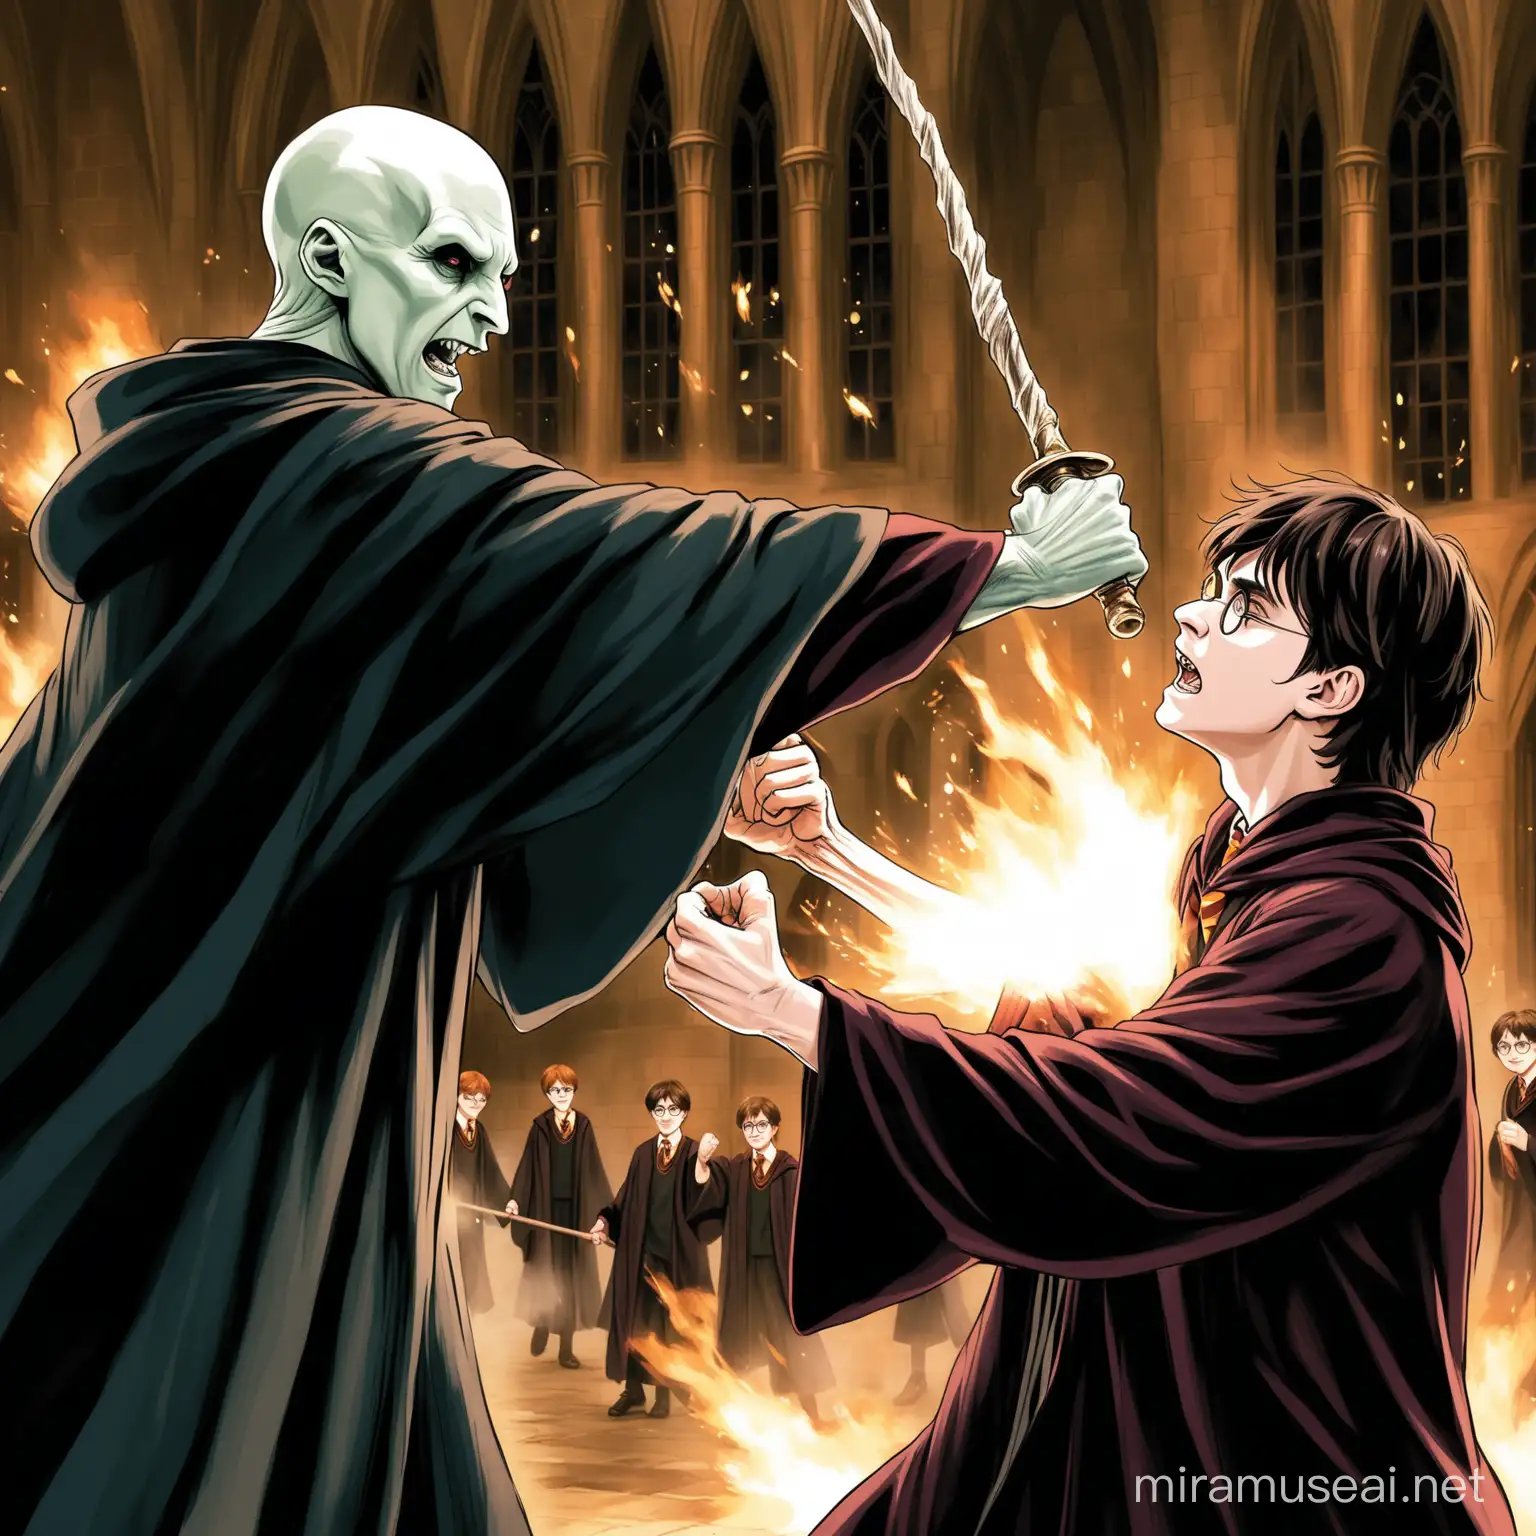 Heroic Wizard Duel Harry Potter Confronts the Dark Lord Voldemort